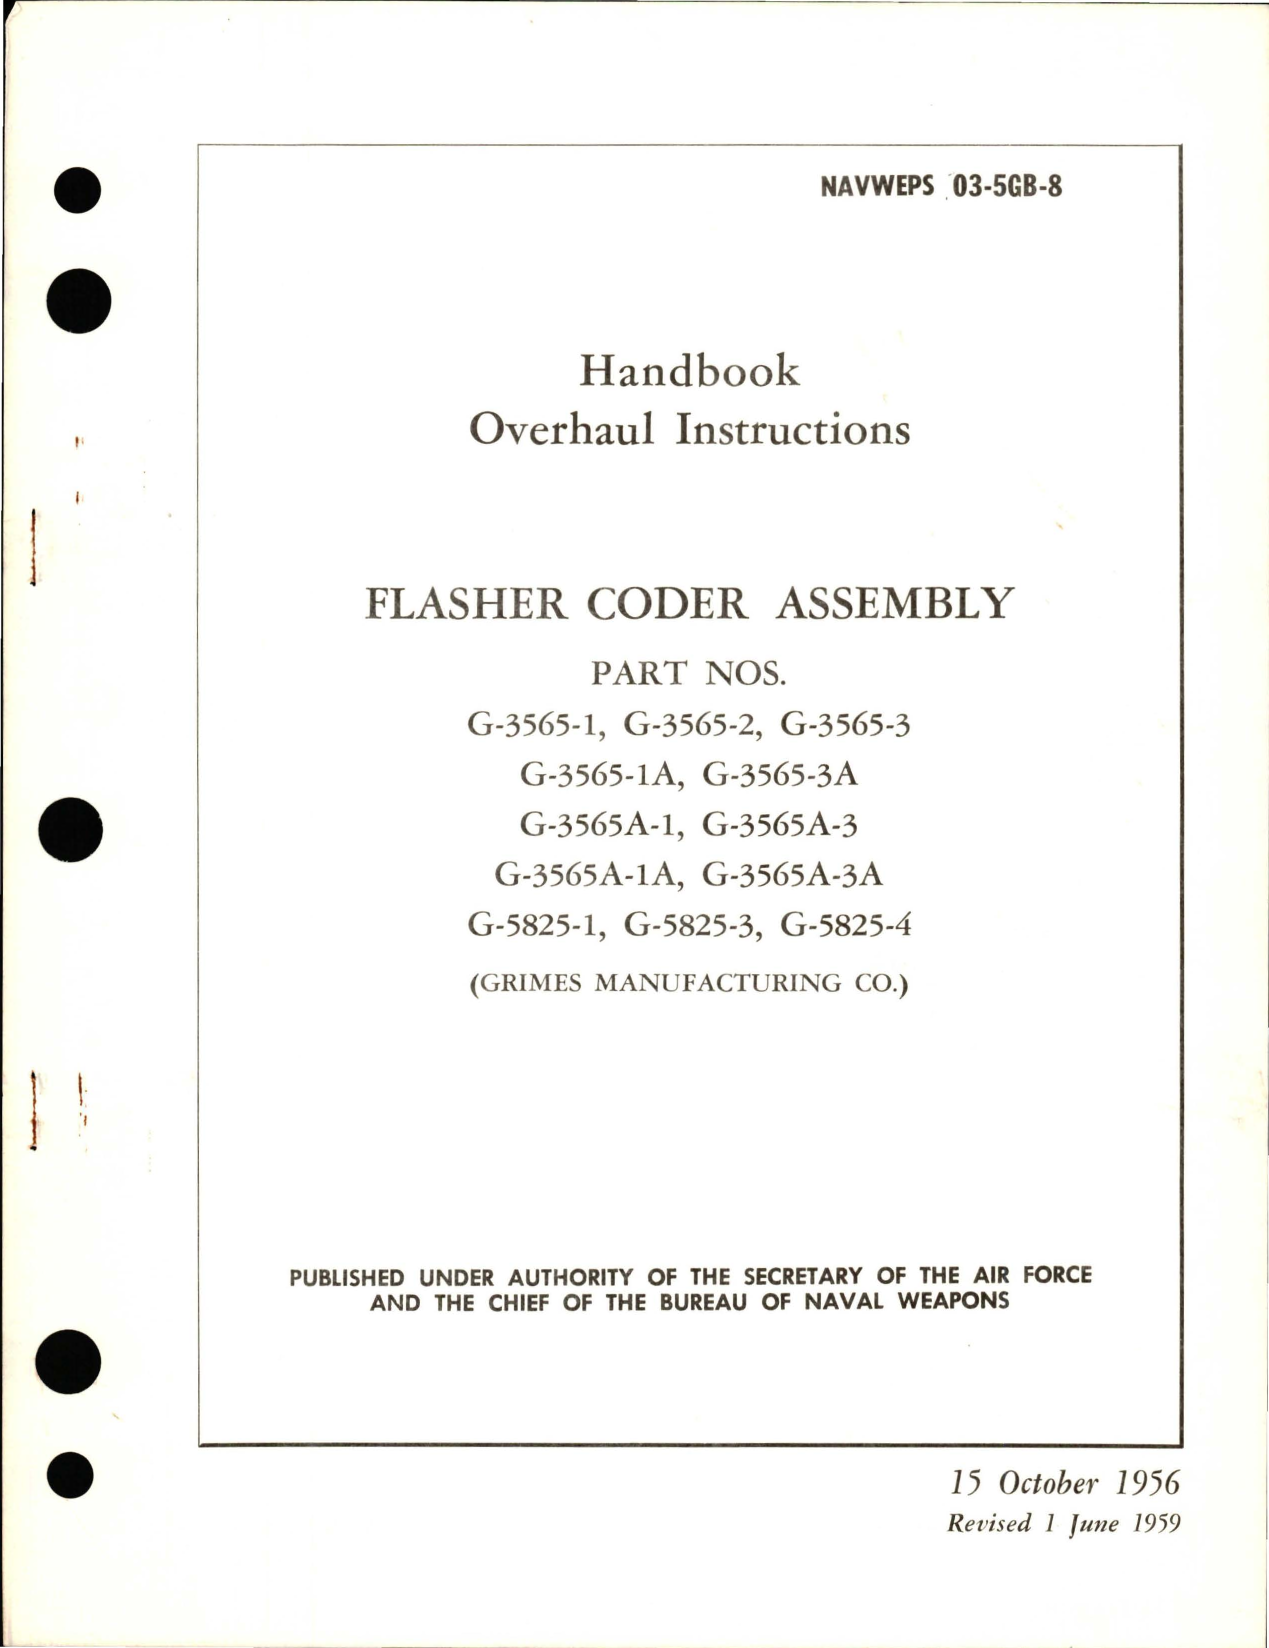 Sample page 1 from AirCorps Library document: Overhaul Instructions for Flasher Coder Assembly - Parts G-3565 Series, G-5825 Series